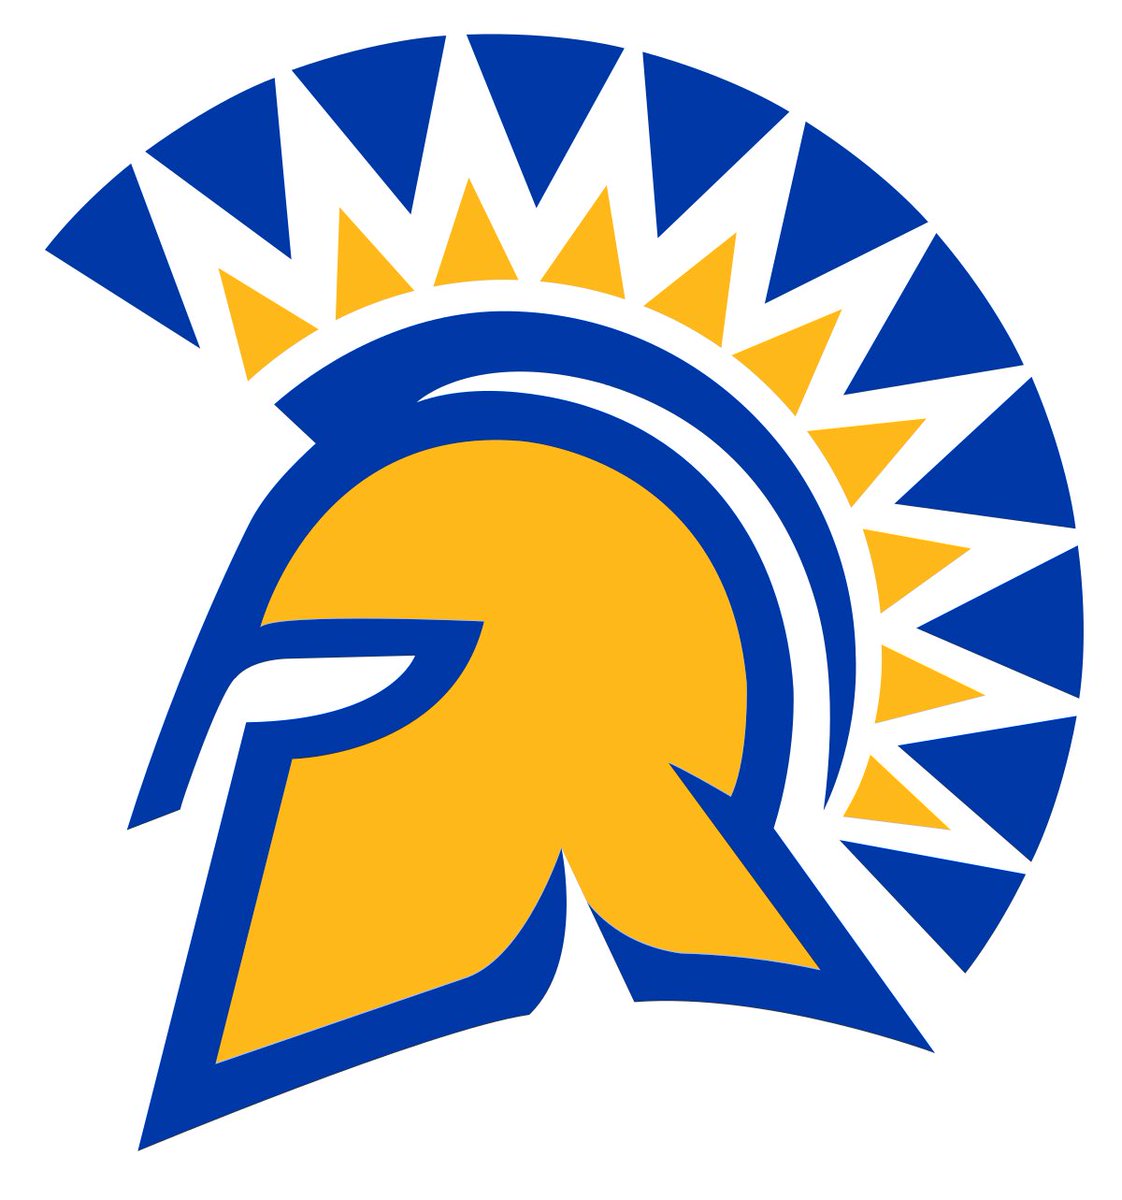 After a great conversation with @CoachLapuaho , I am so thankful to announce I've received an offer from the San Jose State University!